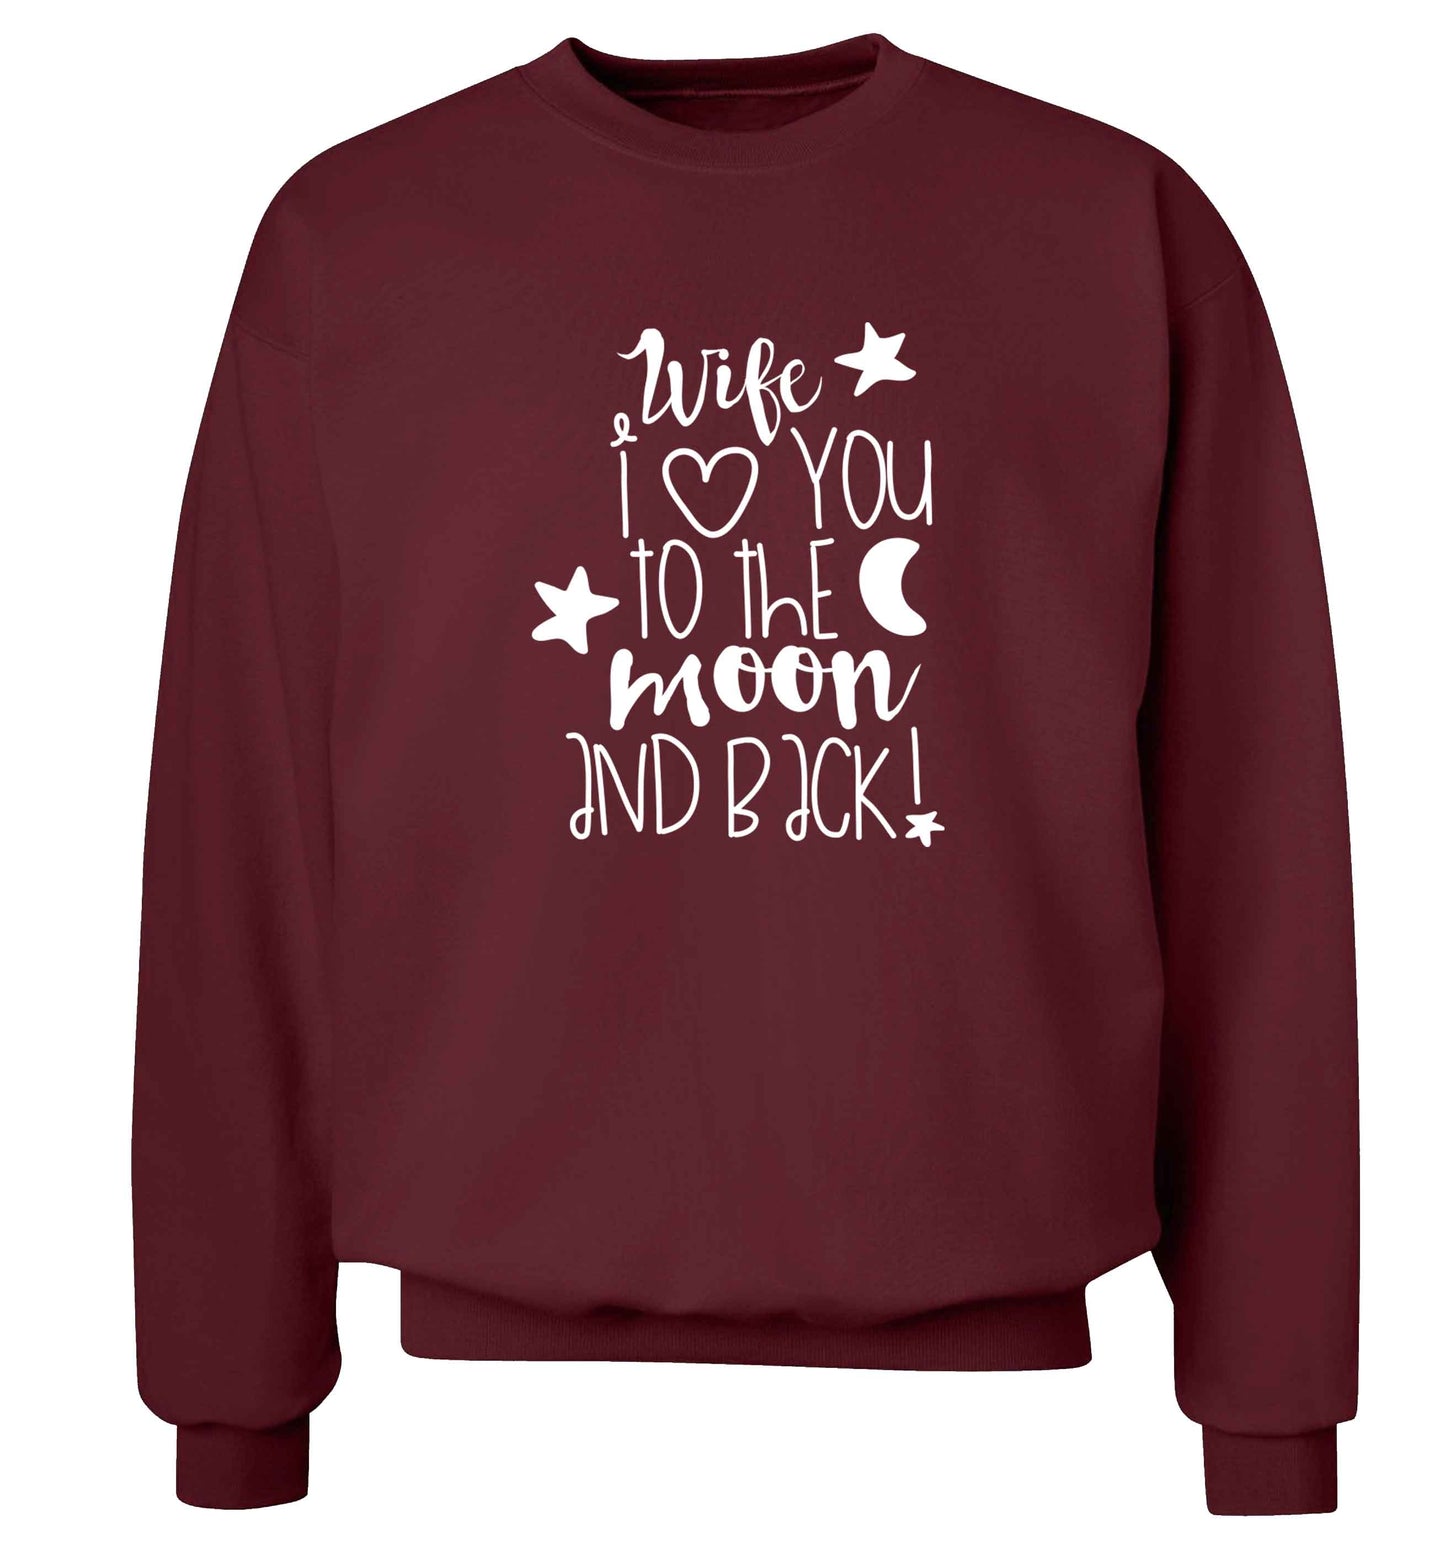 Wife I love you to the moon and back adult's unisex maroon sweater 2XL